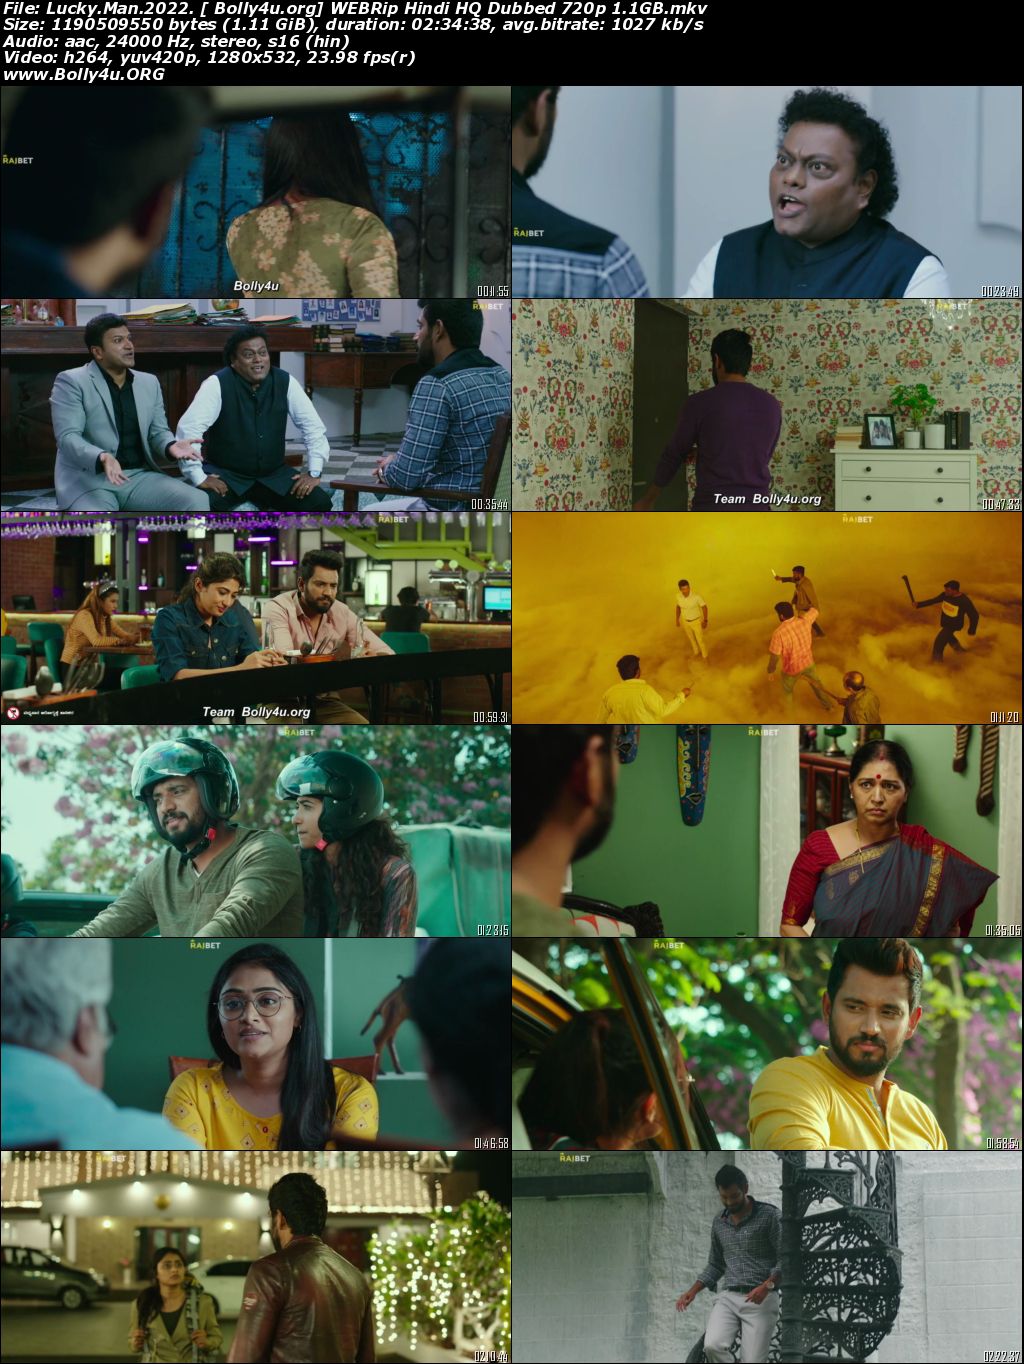 Lucky Man 2022 WEBRip Hindi HQ Dubbed Full Movie Download 1080p 720p 480p